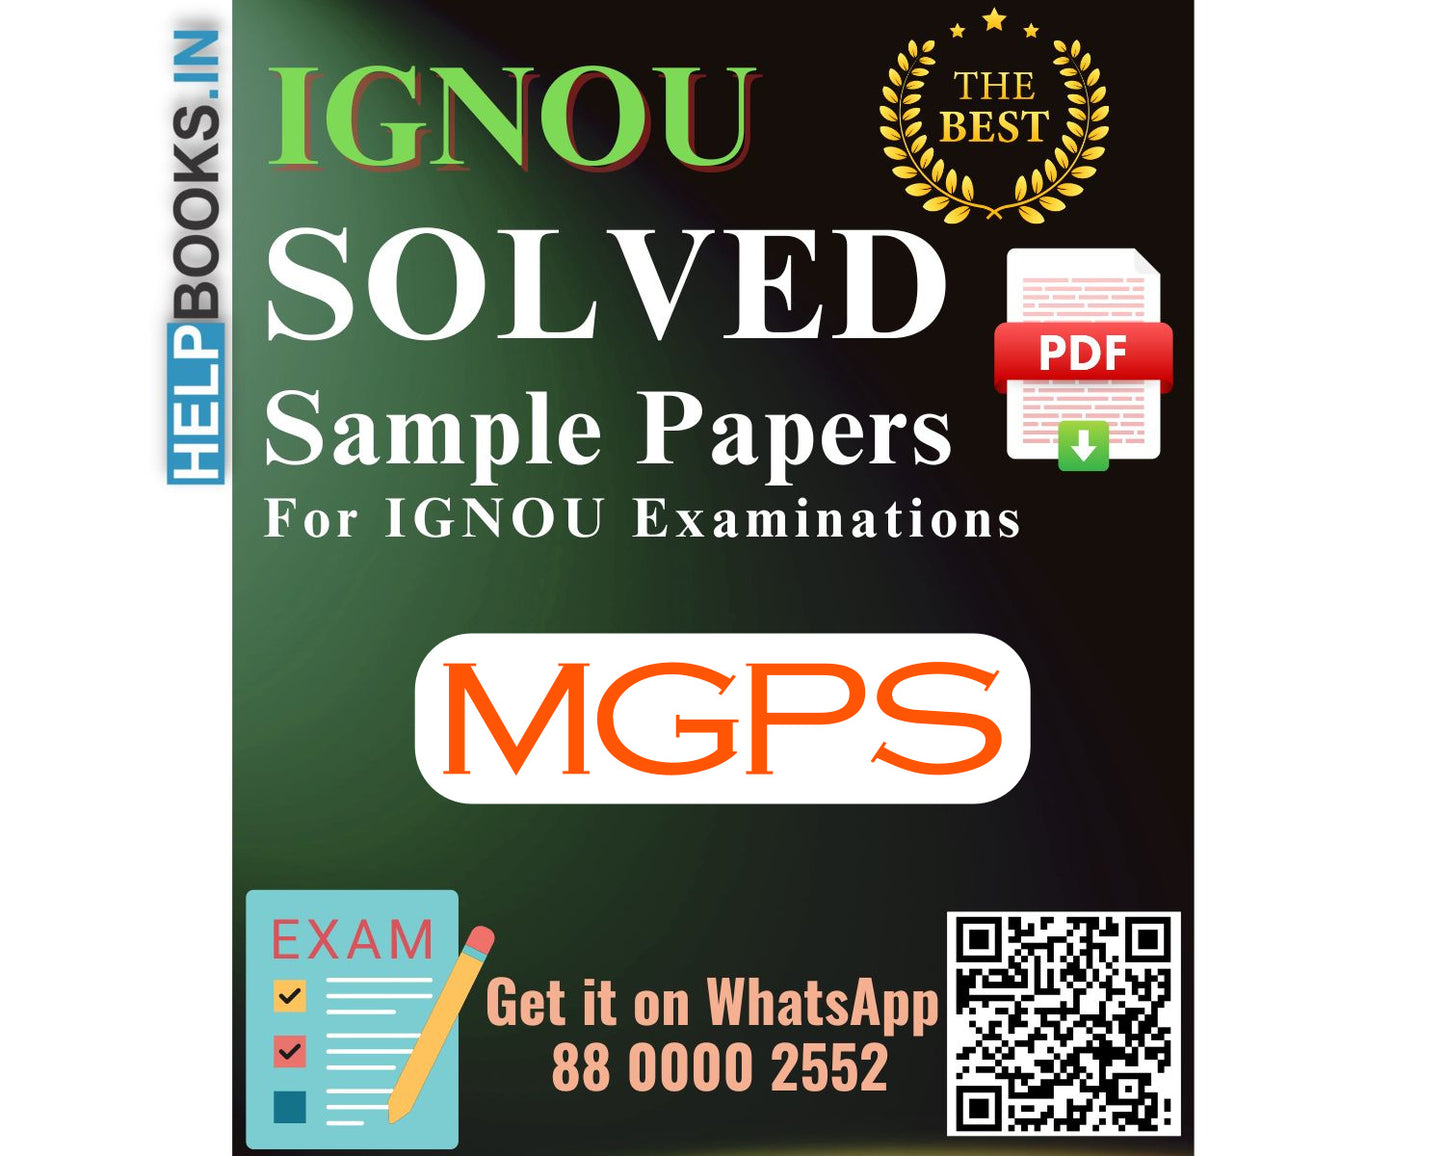 IGNOU Master of Arts (Gandhi and Peace Studies) (MGPS) | Solved Sample Papers for Exams